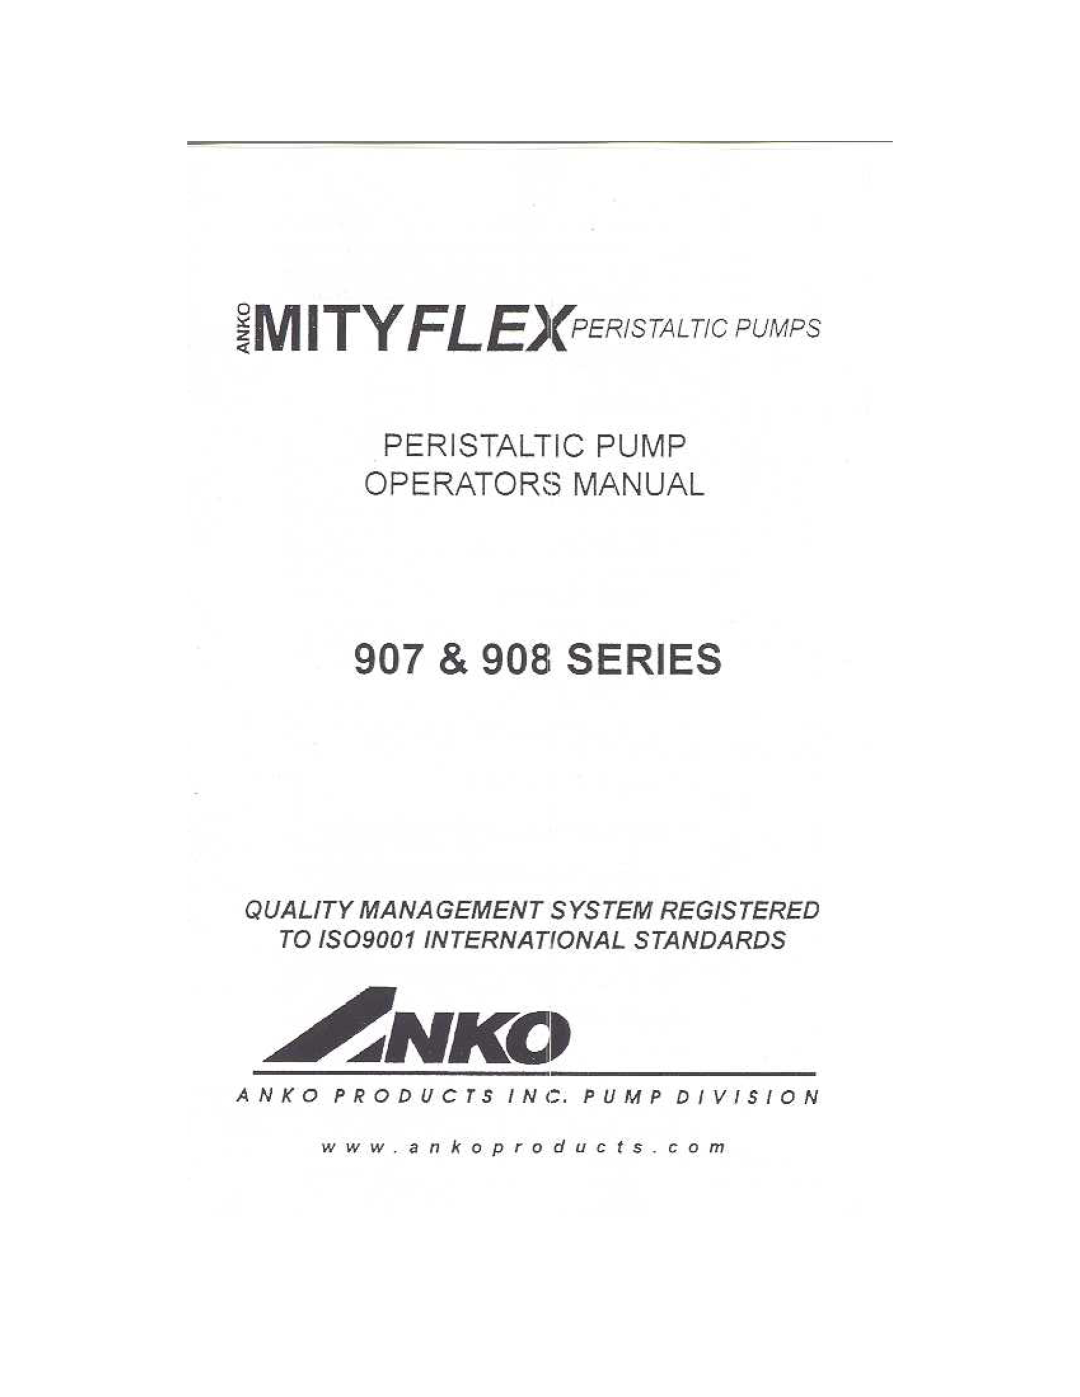 ANKO manual 907 & 908 SERIES, Mityflexperistaltic Pumps, Quality Management System Registered 